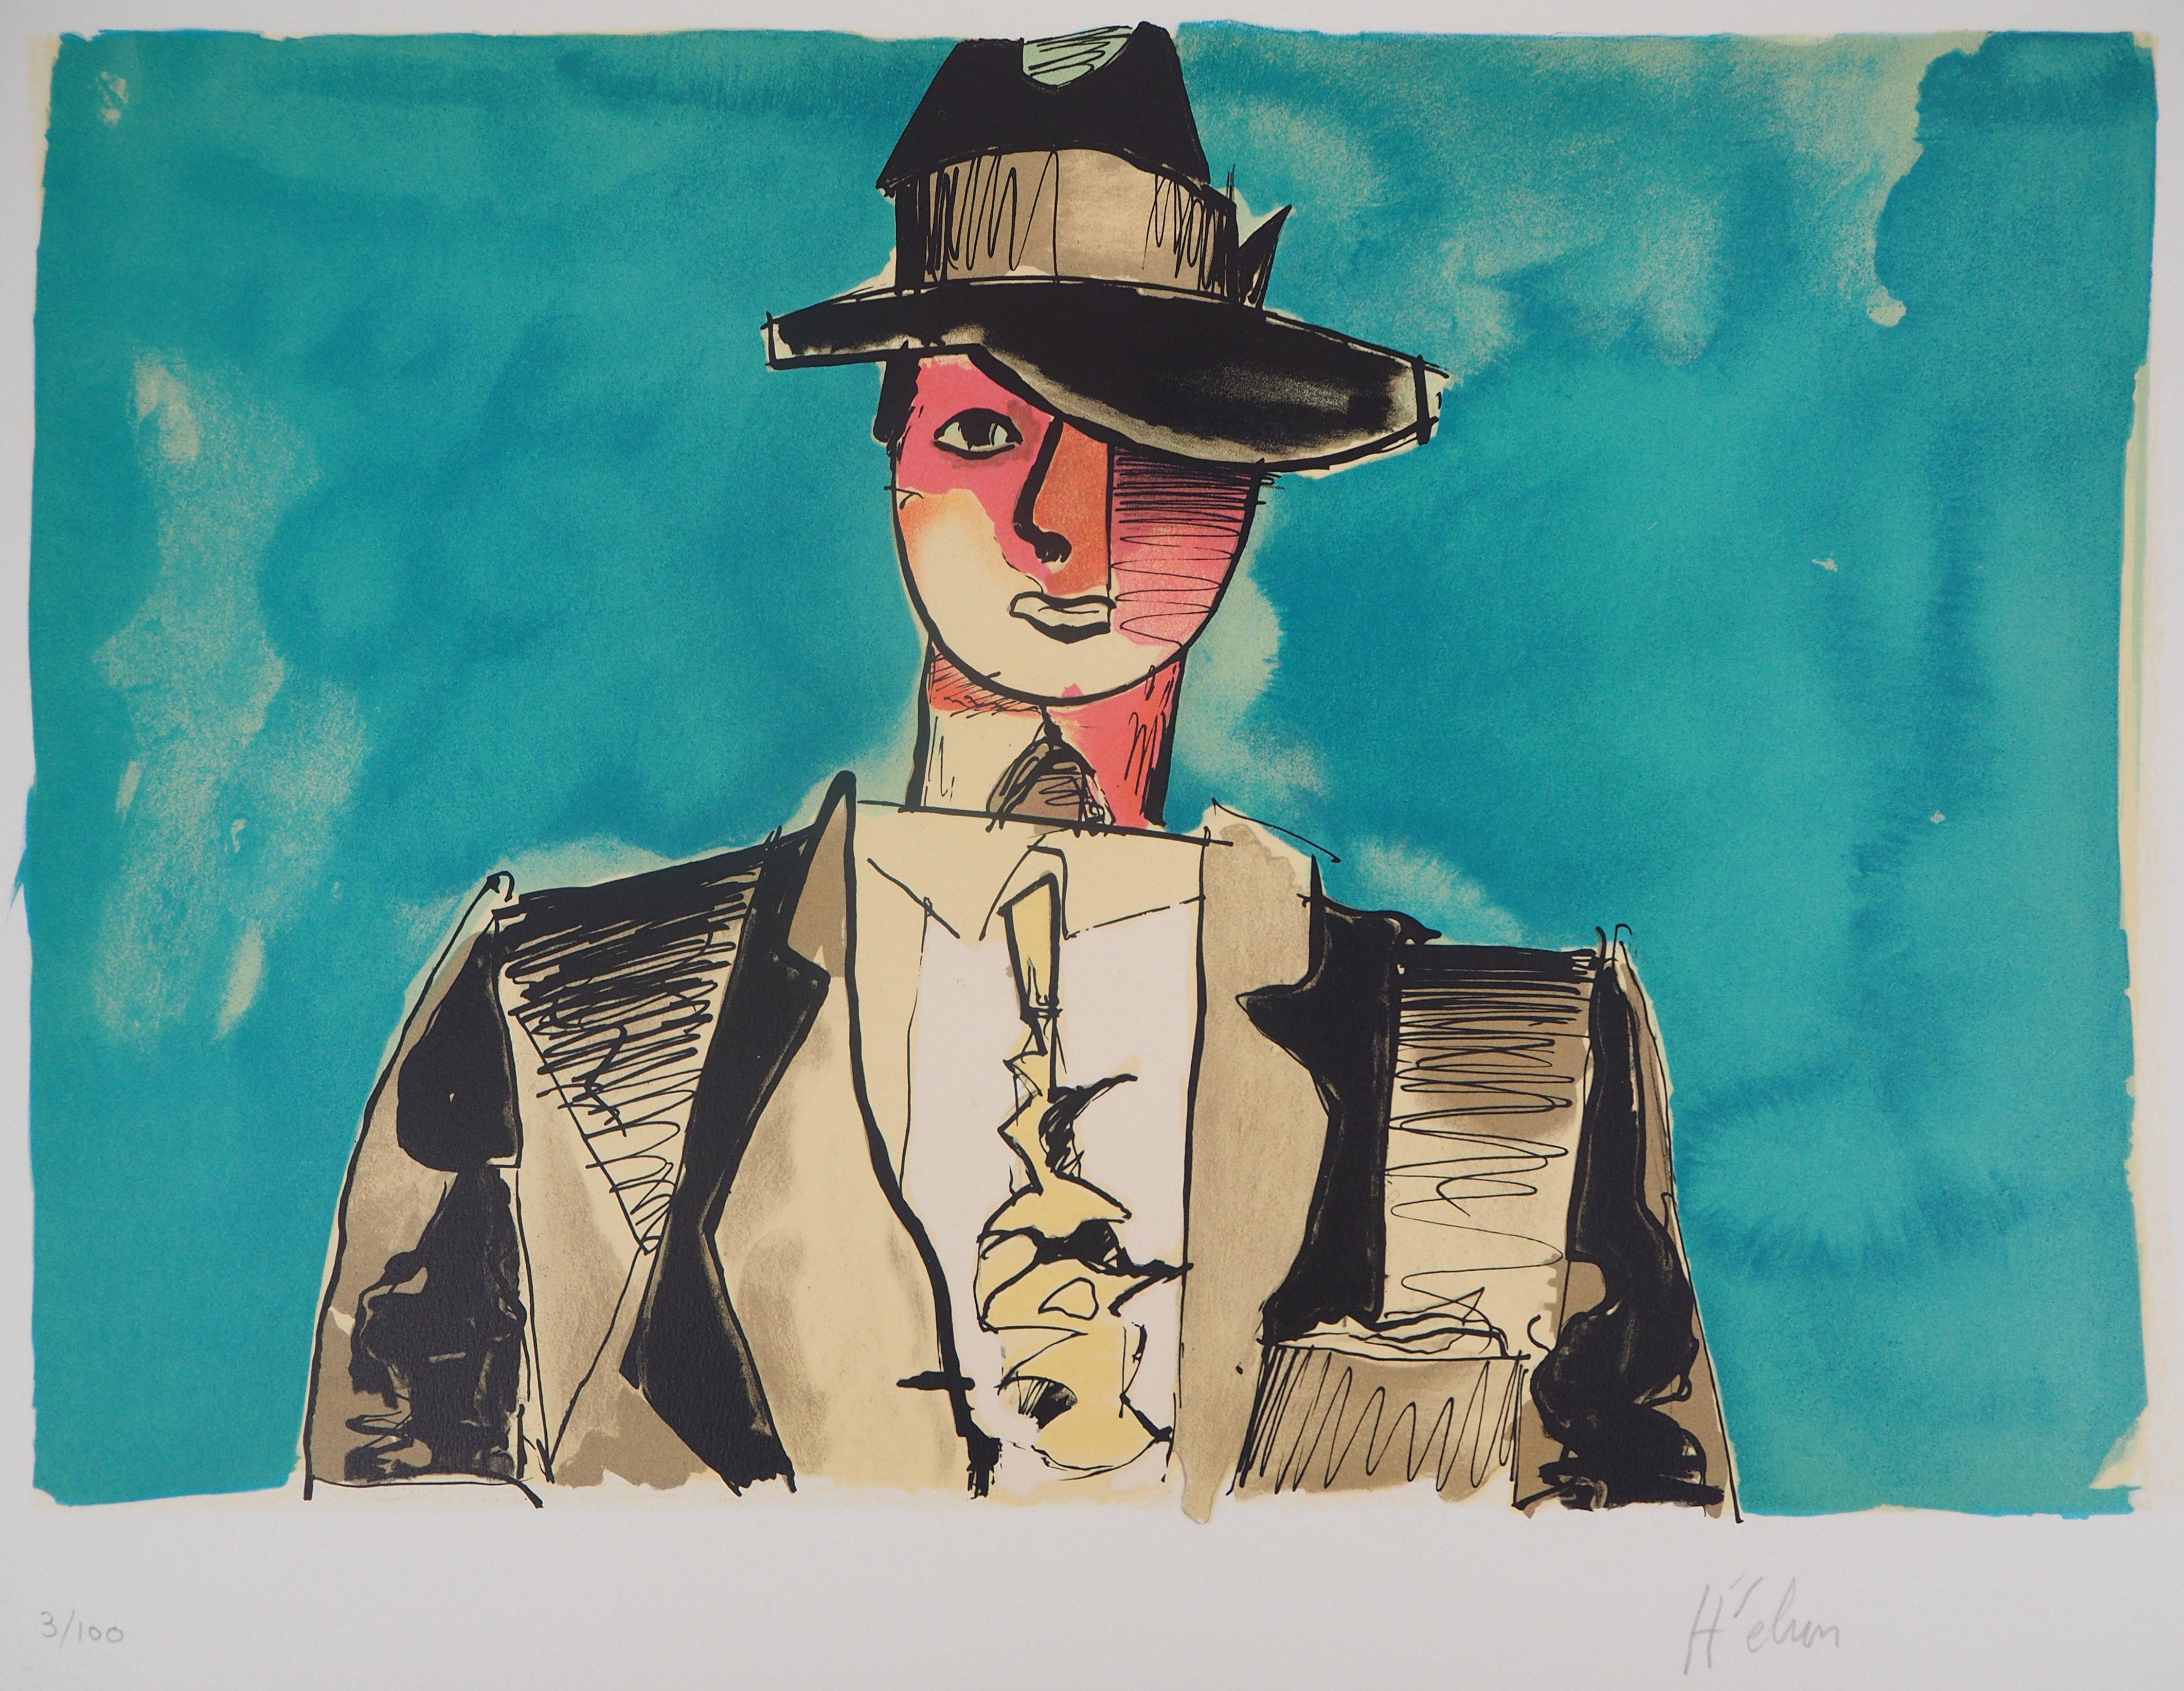 Elegant Man with a Hat - Original handsigned lithograph - 100 copies - Print by Jean Helion